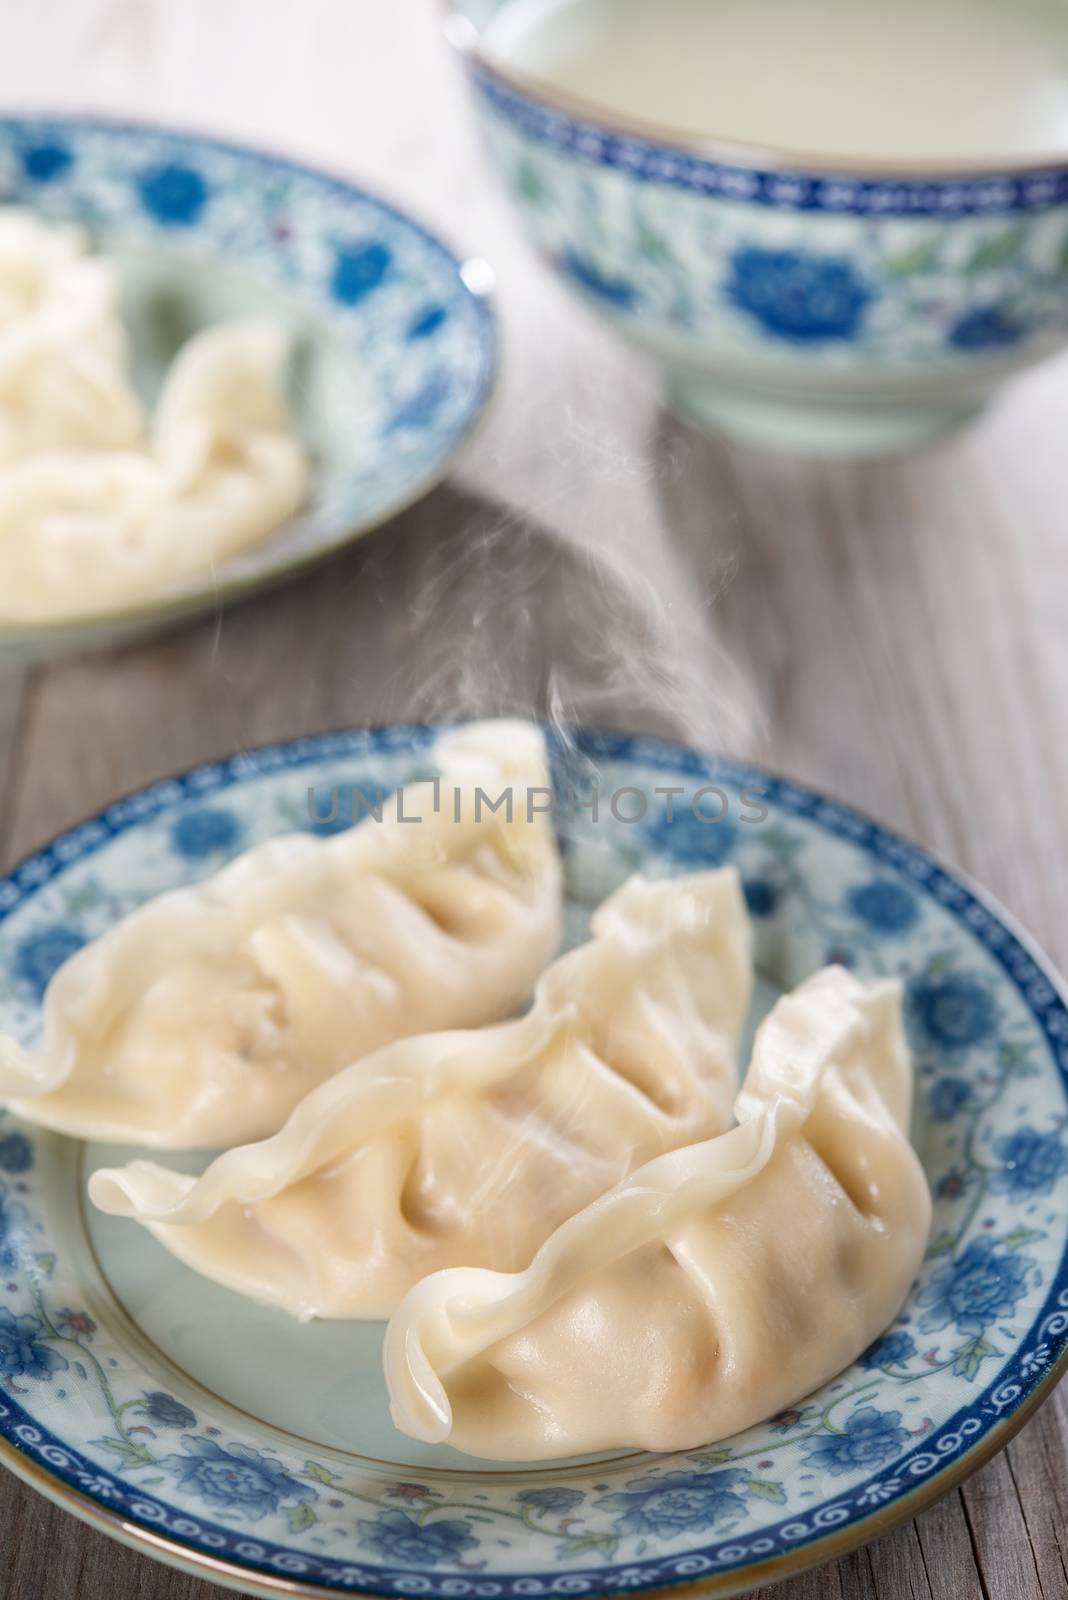 Fresh dumpling on plate. Chinese cuisine on vintage wooden background. Fractal on the plate is generic print.